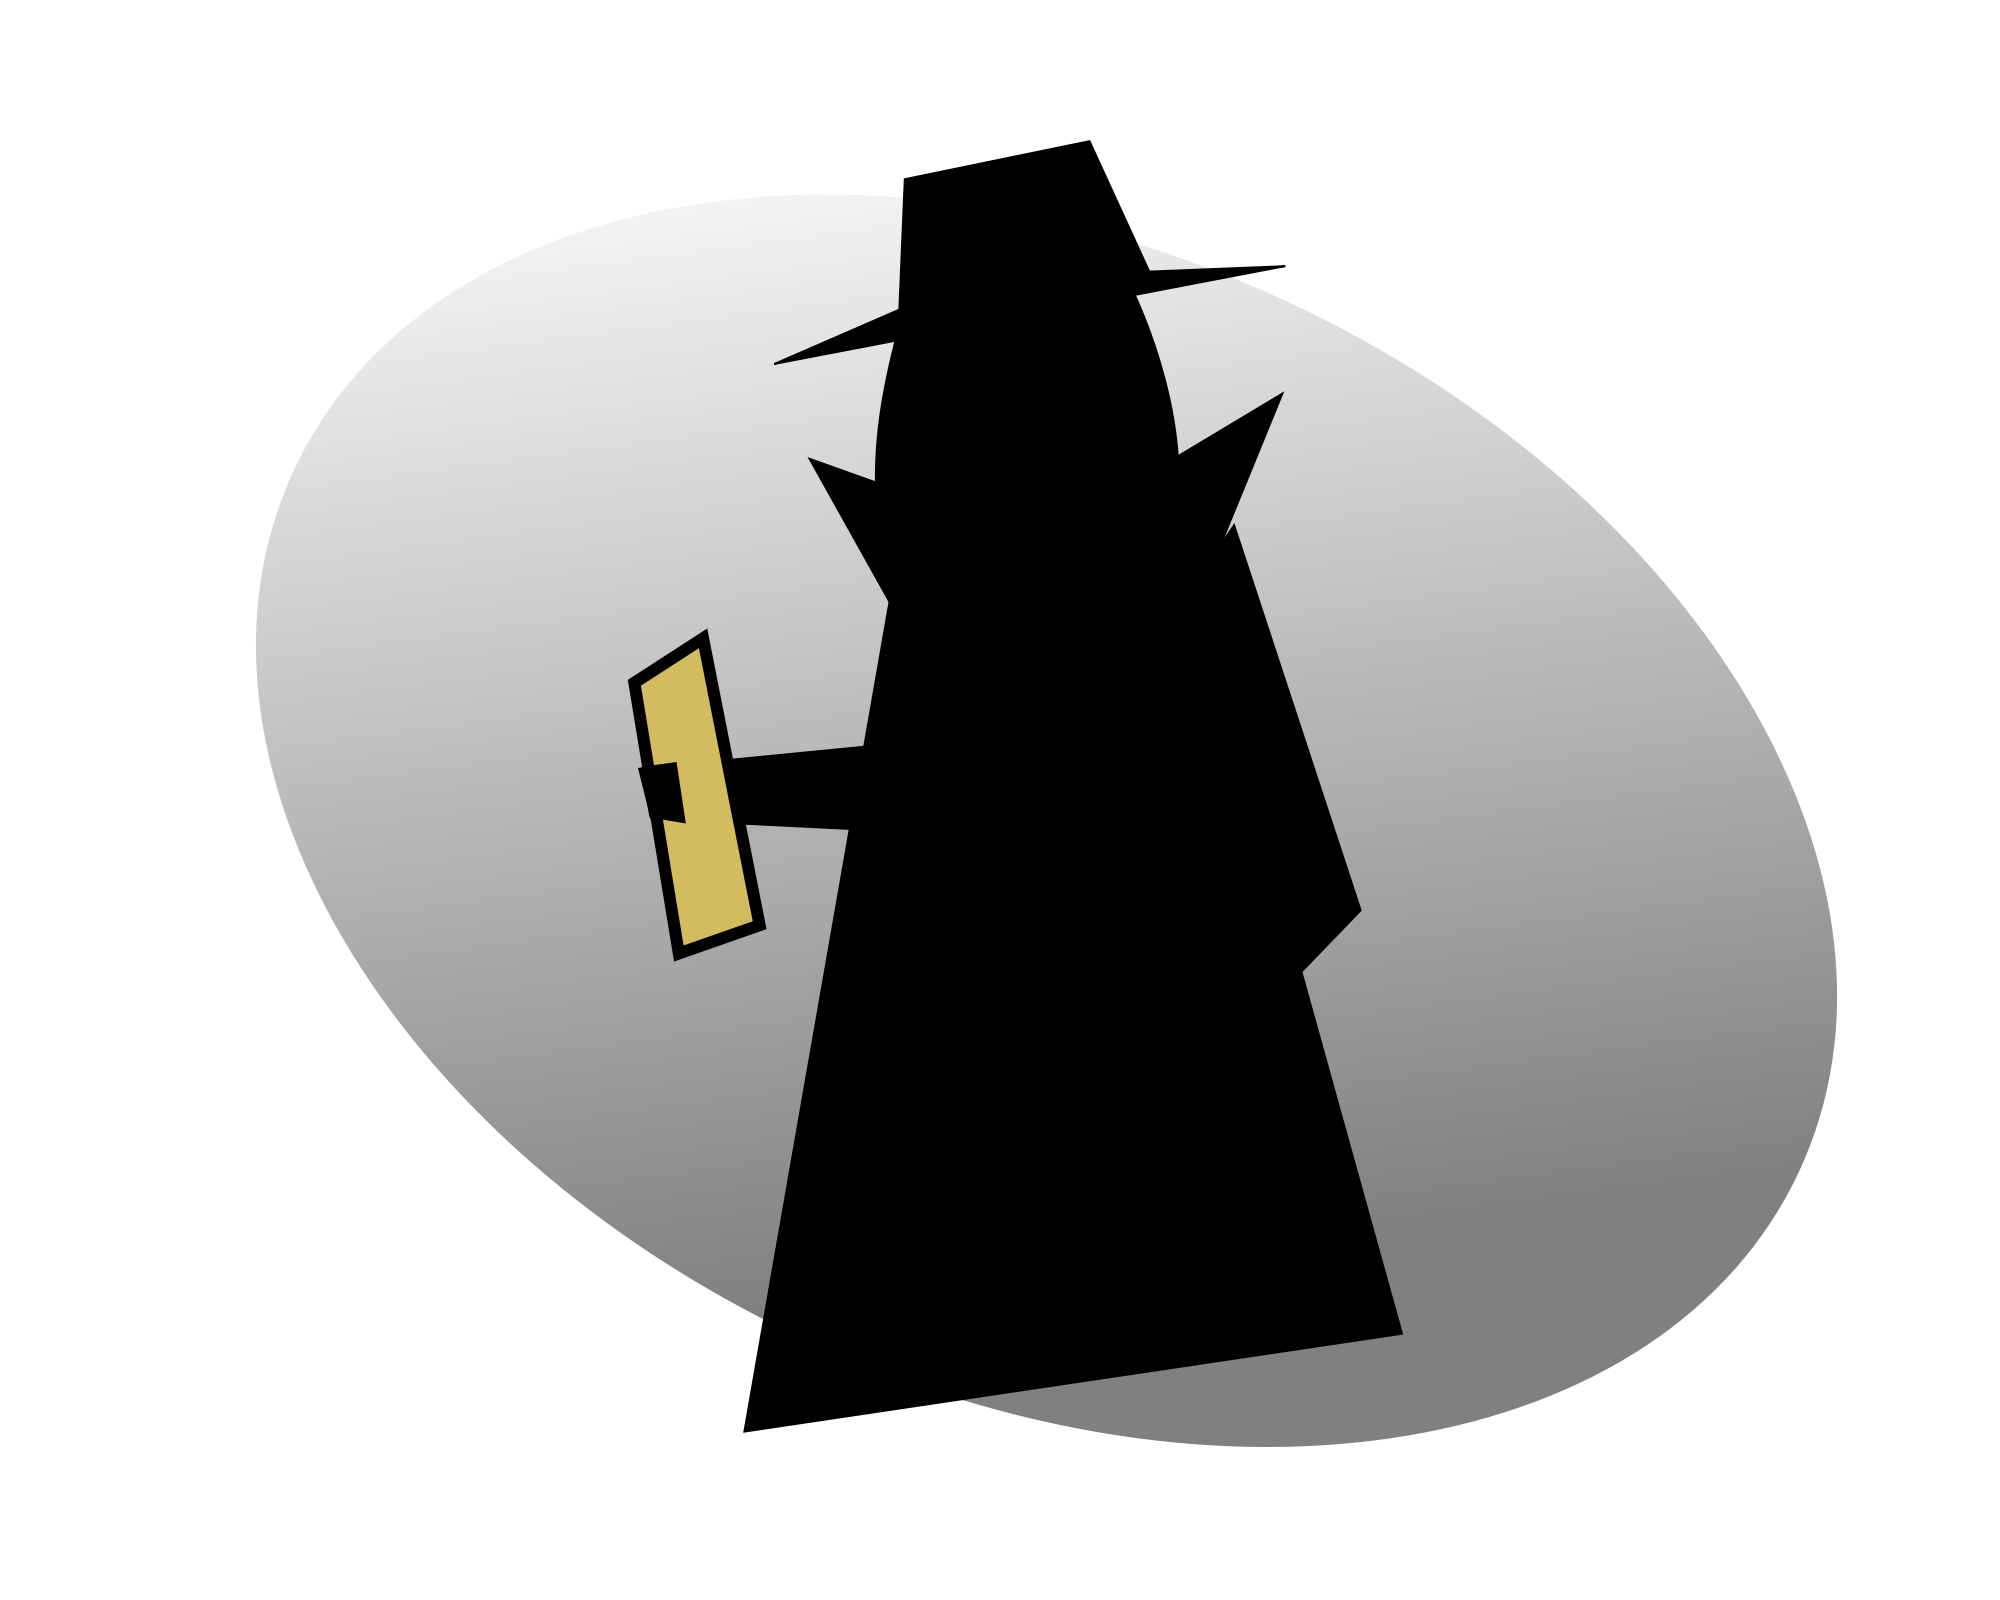 2000px-Spy_silhouette_document.svg.png